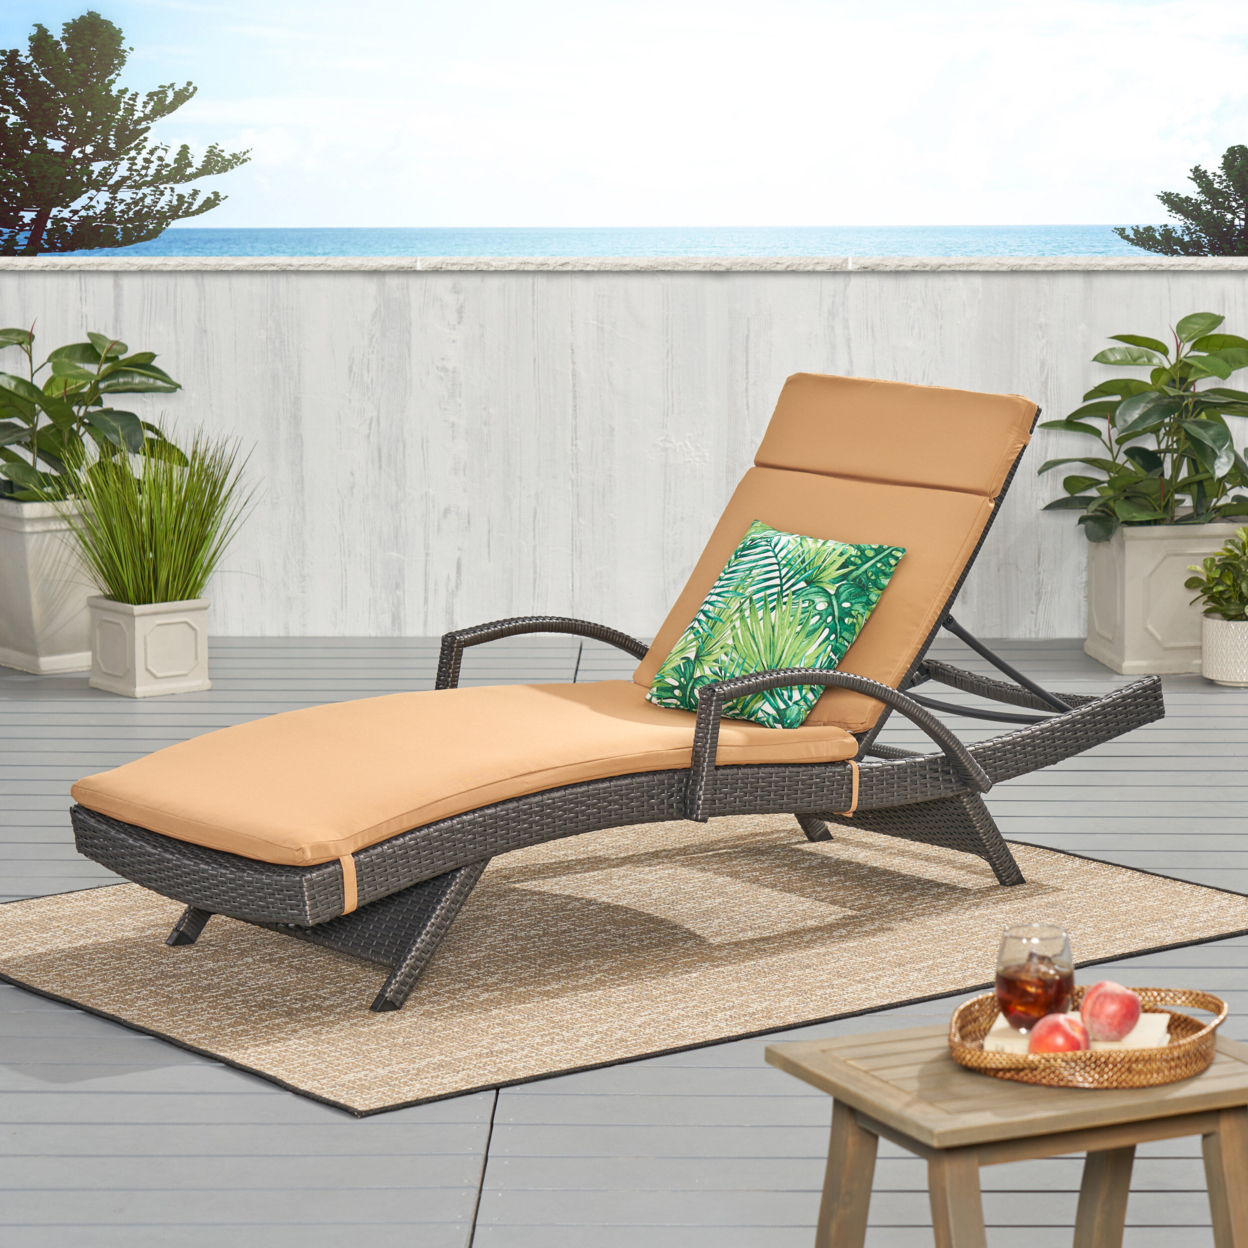 Solaris Outdoor Grey Wicker Armed Chaise Lounge With Water Resistant Cushion - Caramel